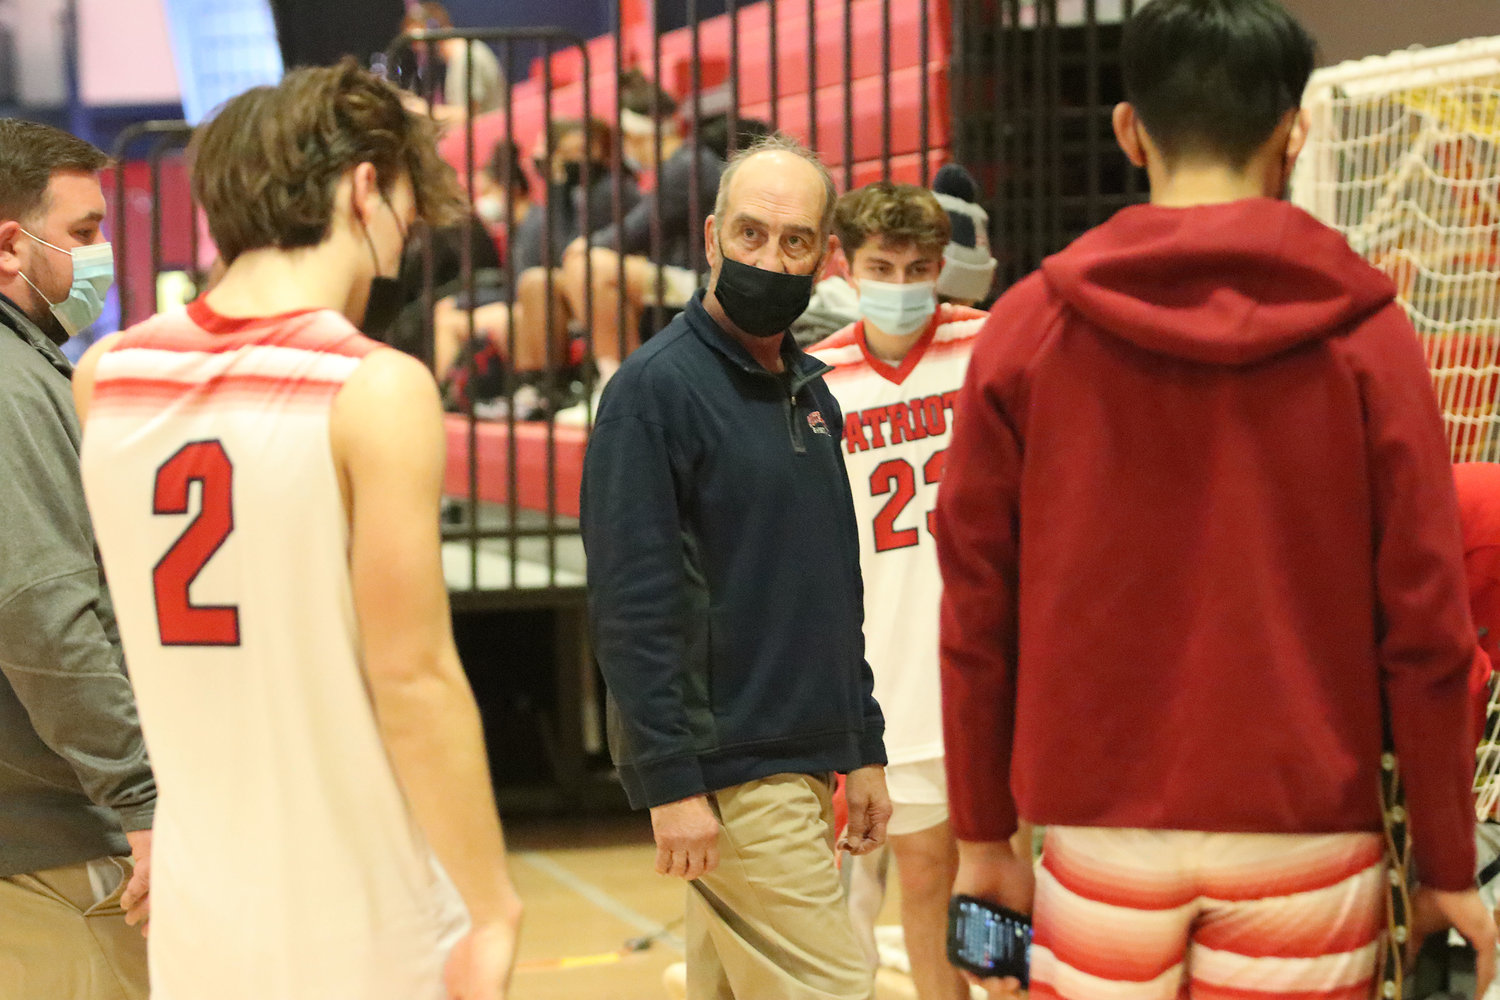 Joe Occhi, head coach of the Patriots boys’ varsity basketball team, meets with his players following their win Saturday in the PHS field house. “It’s a little bit fitting, I think, that we were the ones that closed this building in March and the ones to open it again now,” he said.